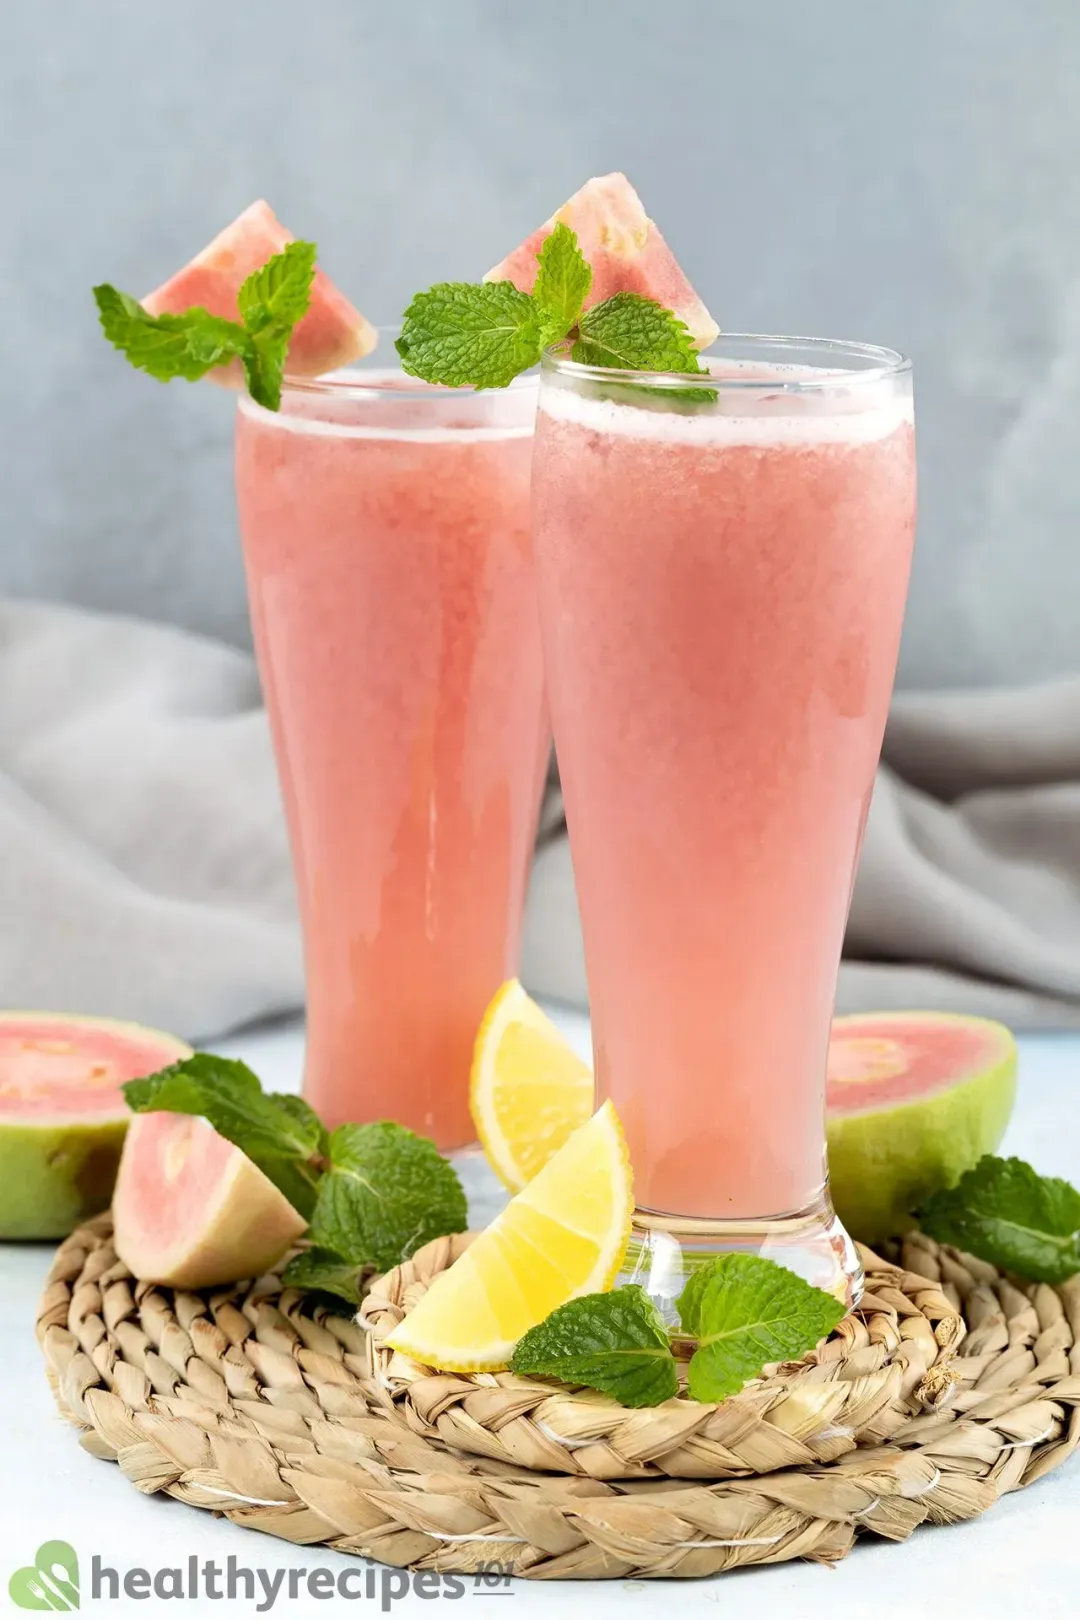 Two tall and pink glasses of guava juice surrounded by lemon wedges and large guava slices